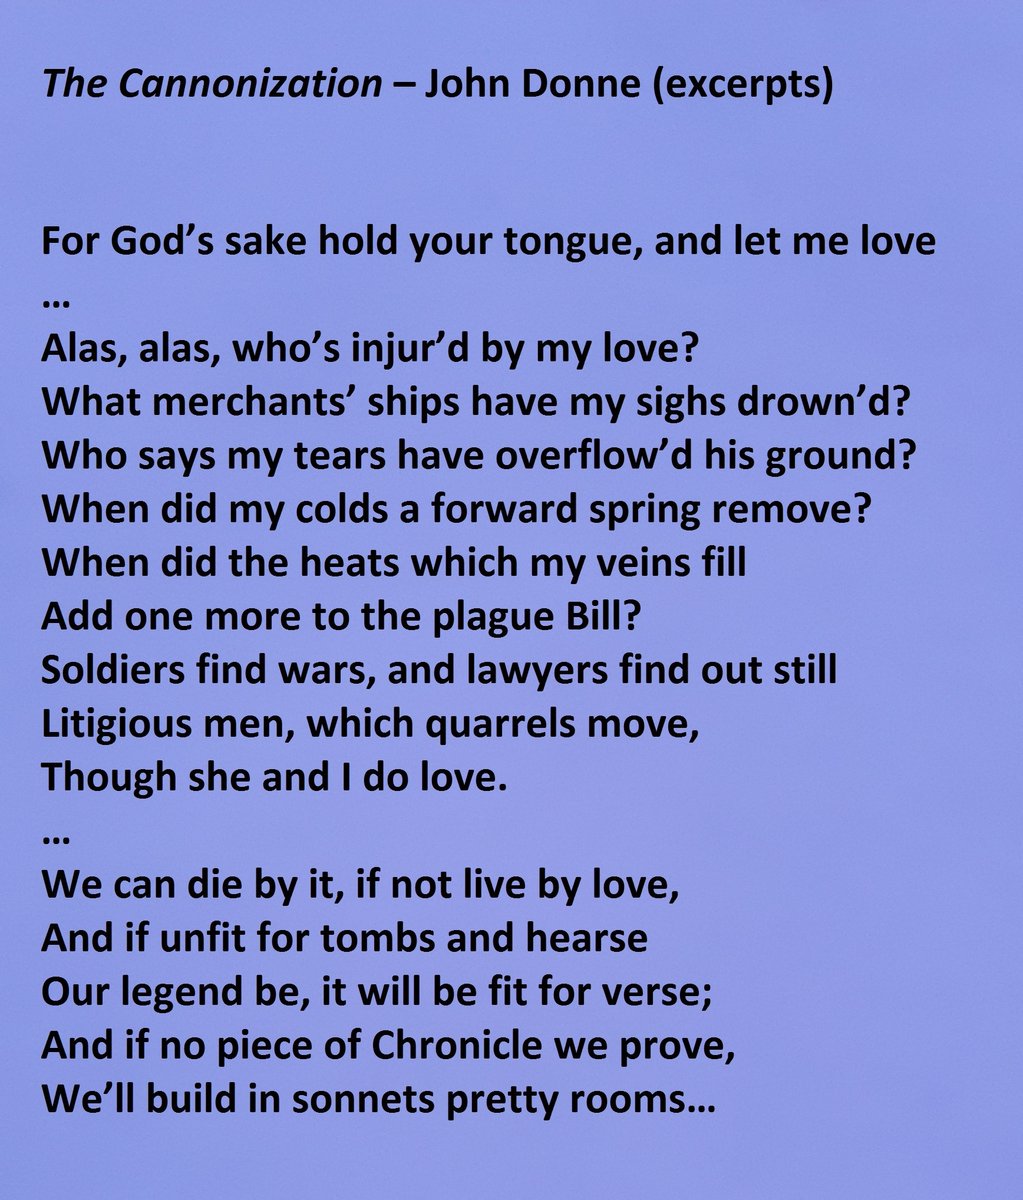 "The Cannonization" by John Donne - 3 extracts - first line: "For God's sake hold your tongue and let me love"; second extract beginning with "Alas, alas, who's injured by my love?" ending with "Though she and I do love."; third extract beginning with "We can die by it, if not live by love," and ending with "We'll build in sonnets pretty rooms."